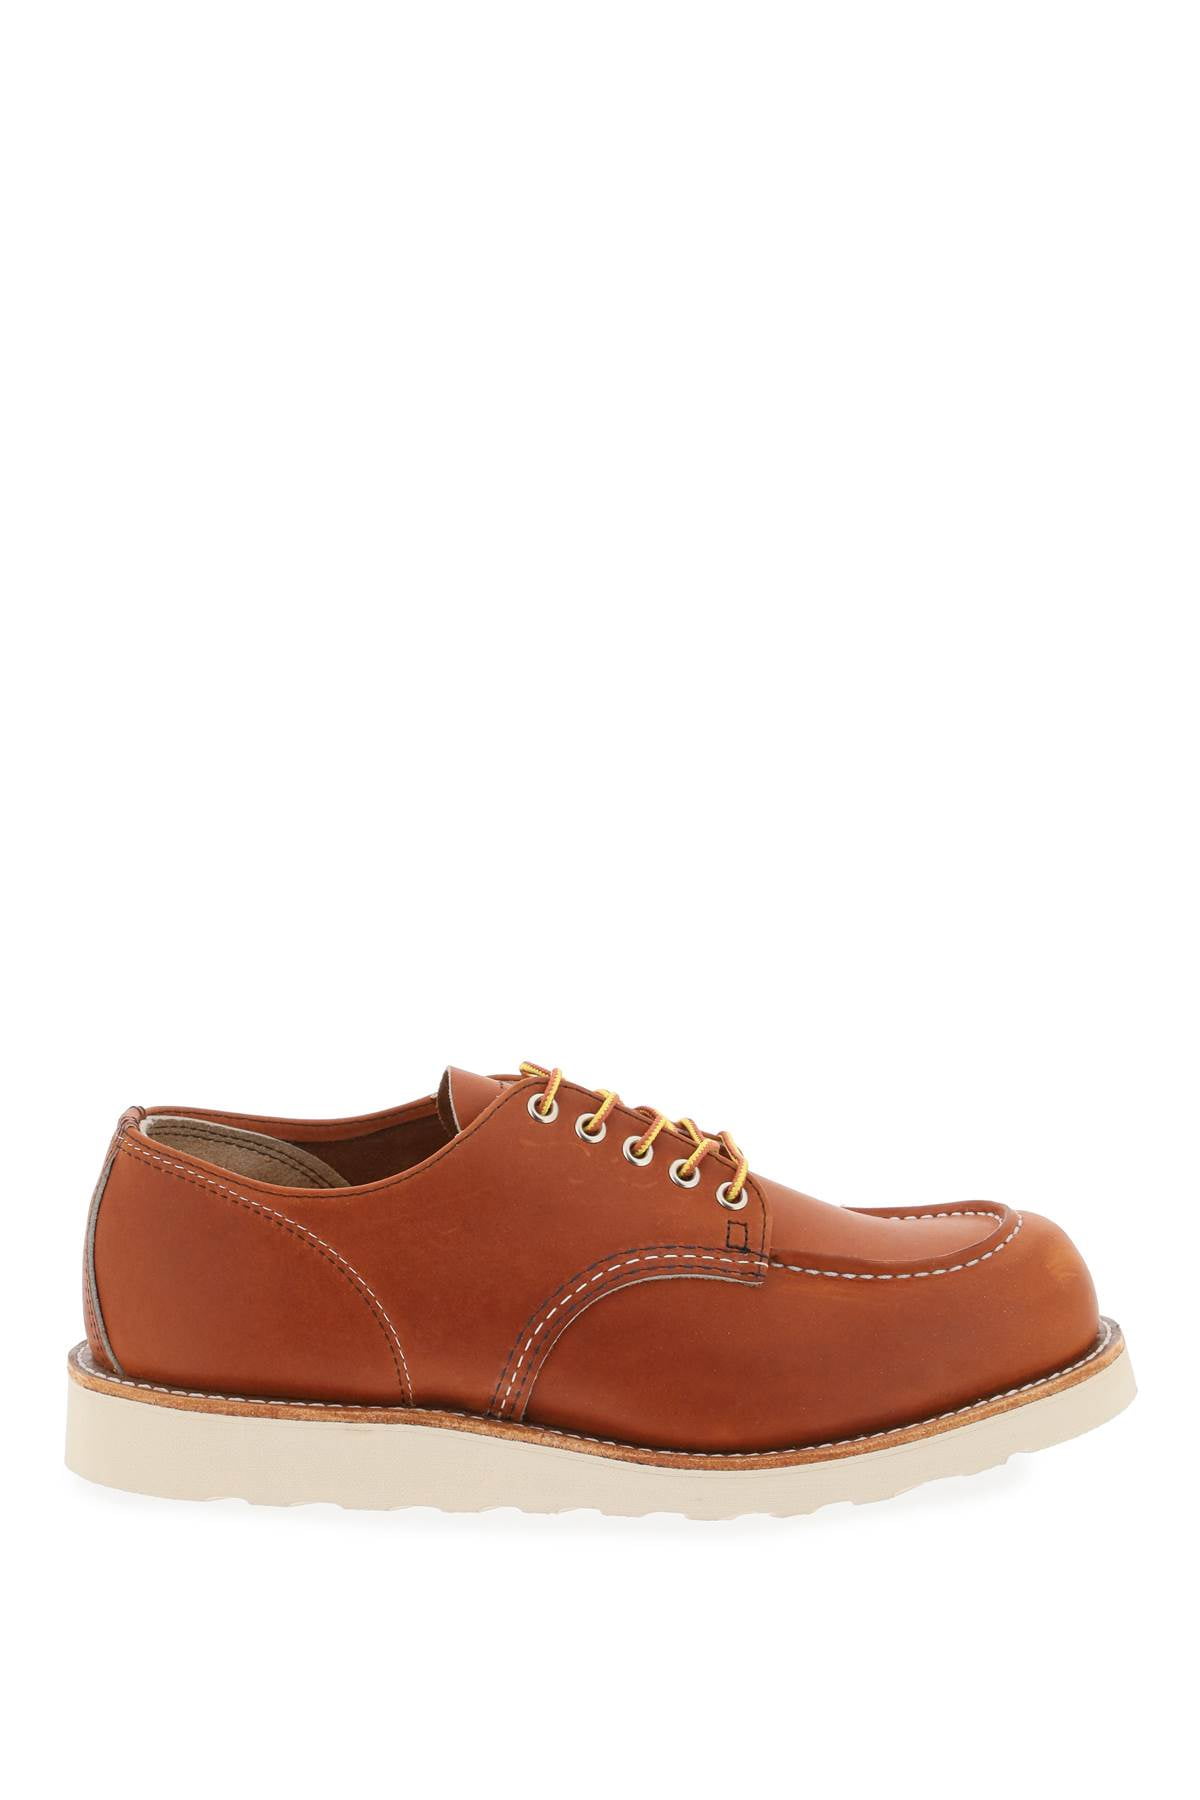 Red Wing Shoes Laced Moc Toe Oxford Men - Walmart.com